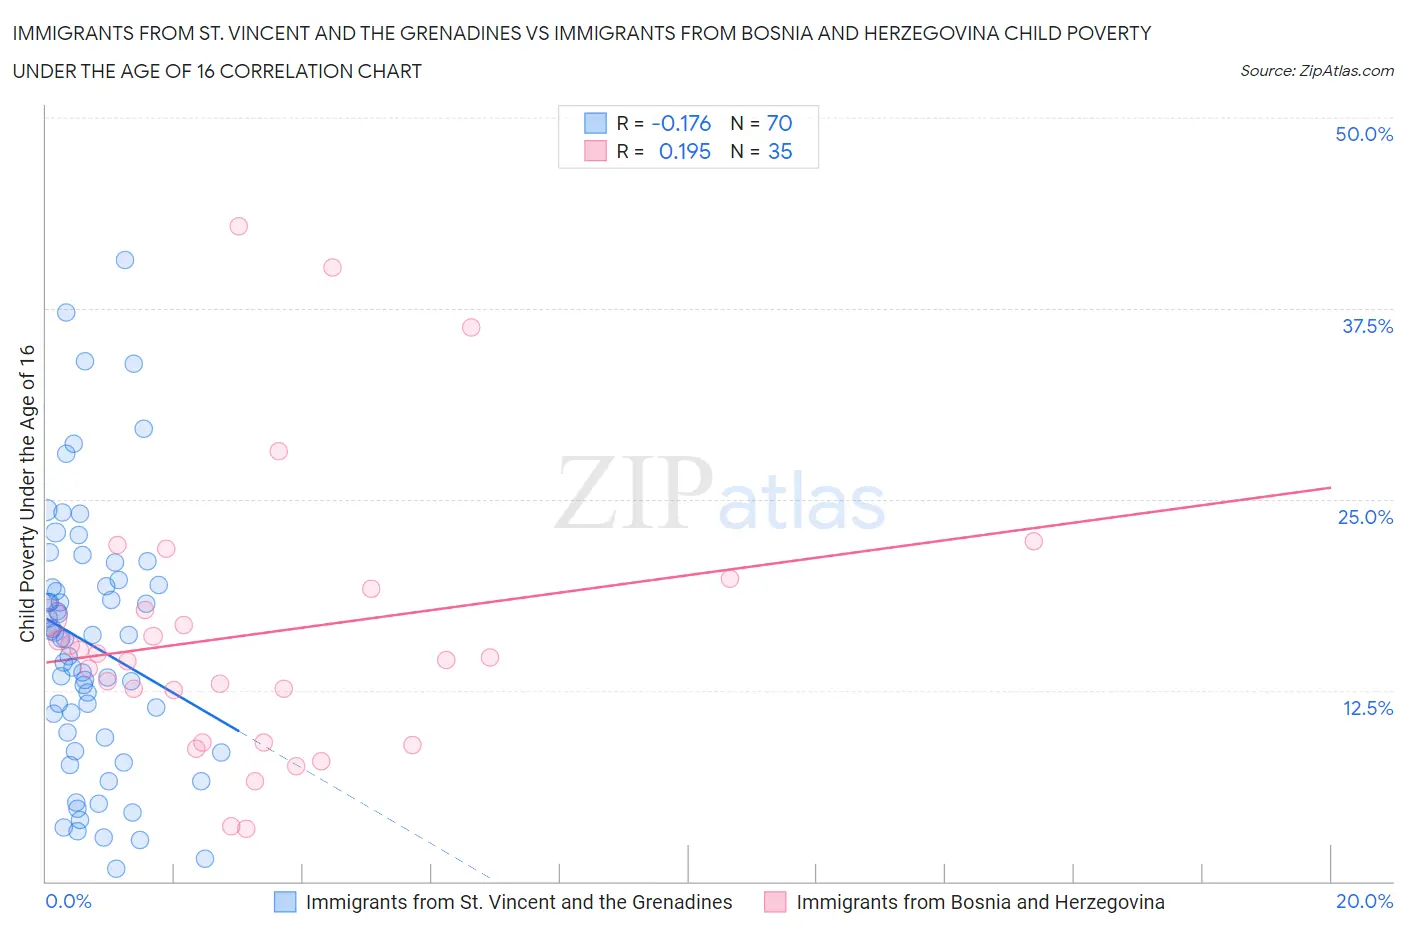 Immigrants from St. Vincent and the Grenadines vs Immigrants from Bosnia and Herzegovina Child Poverty Under the Age of 16